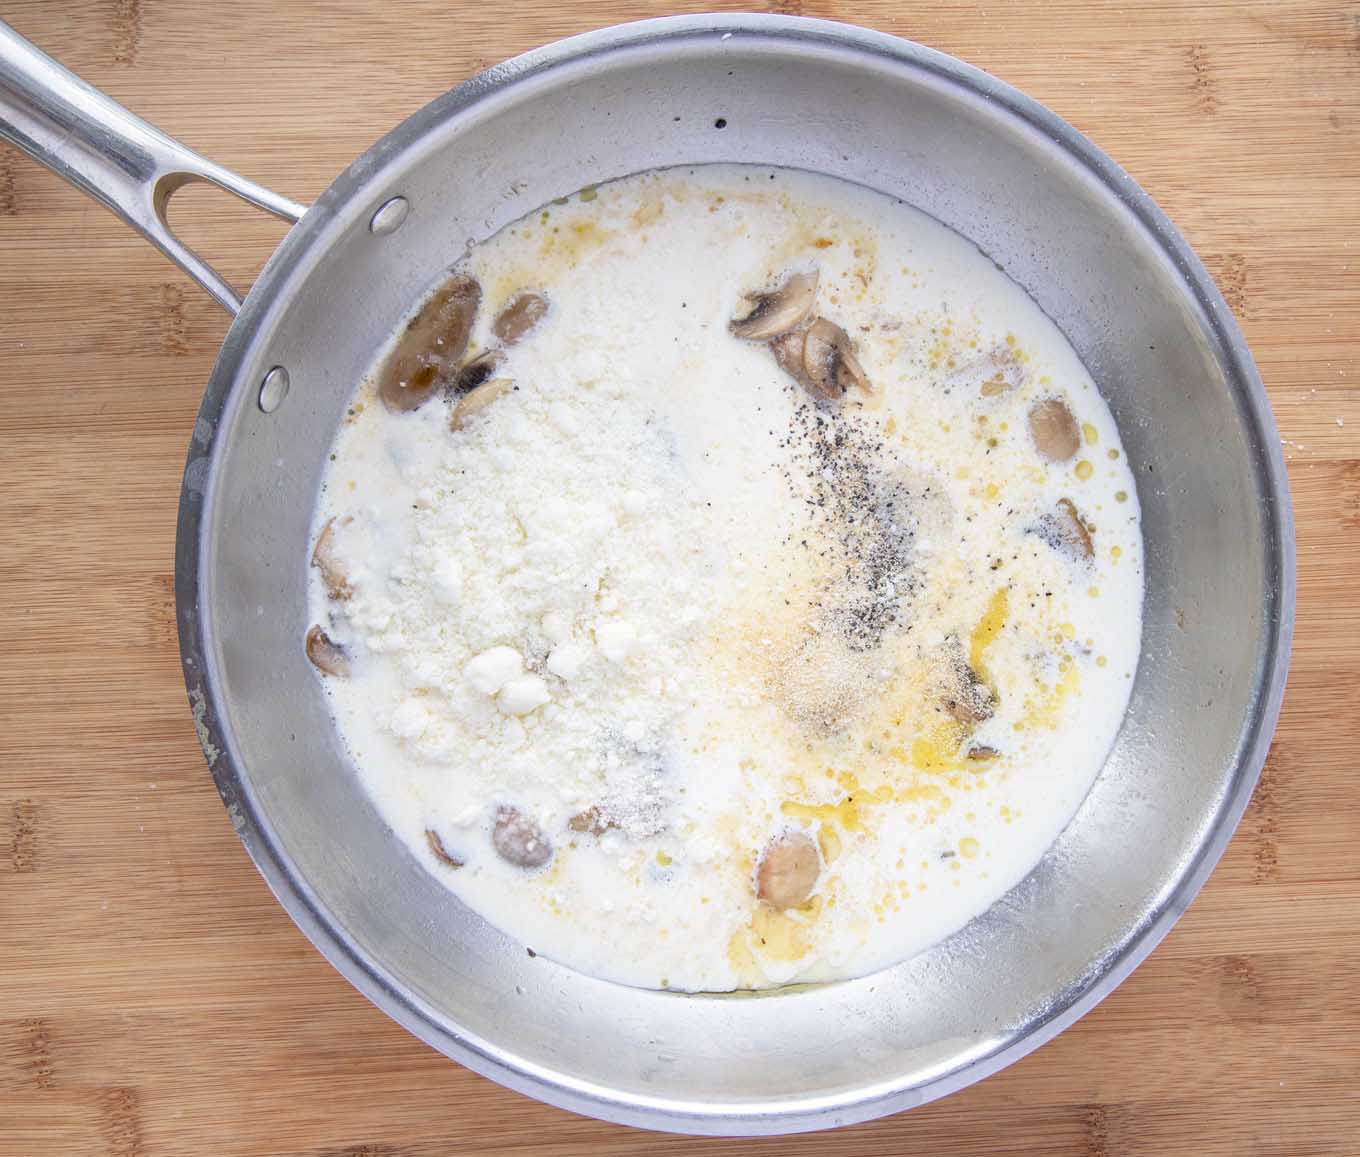 cream, romano cheese and spices with the mushrooms in a saute pan.